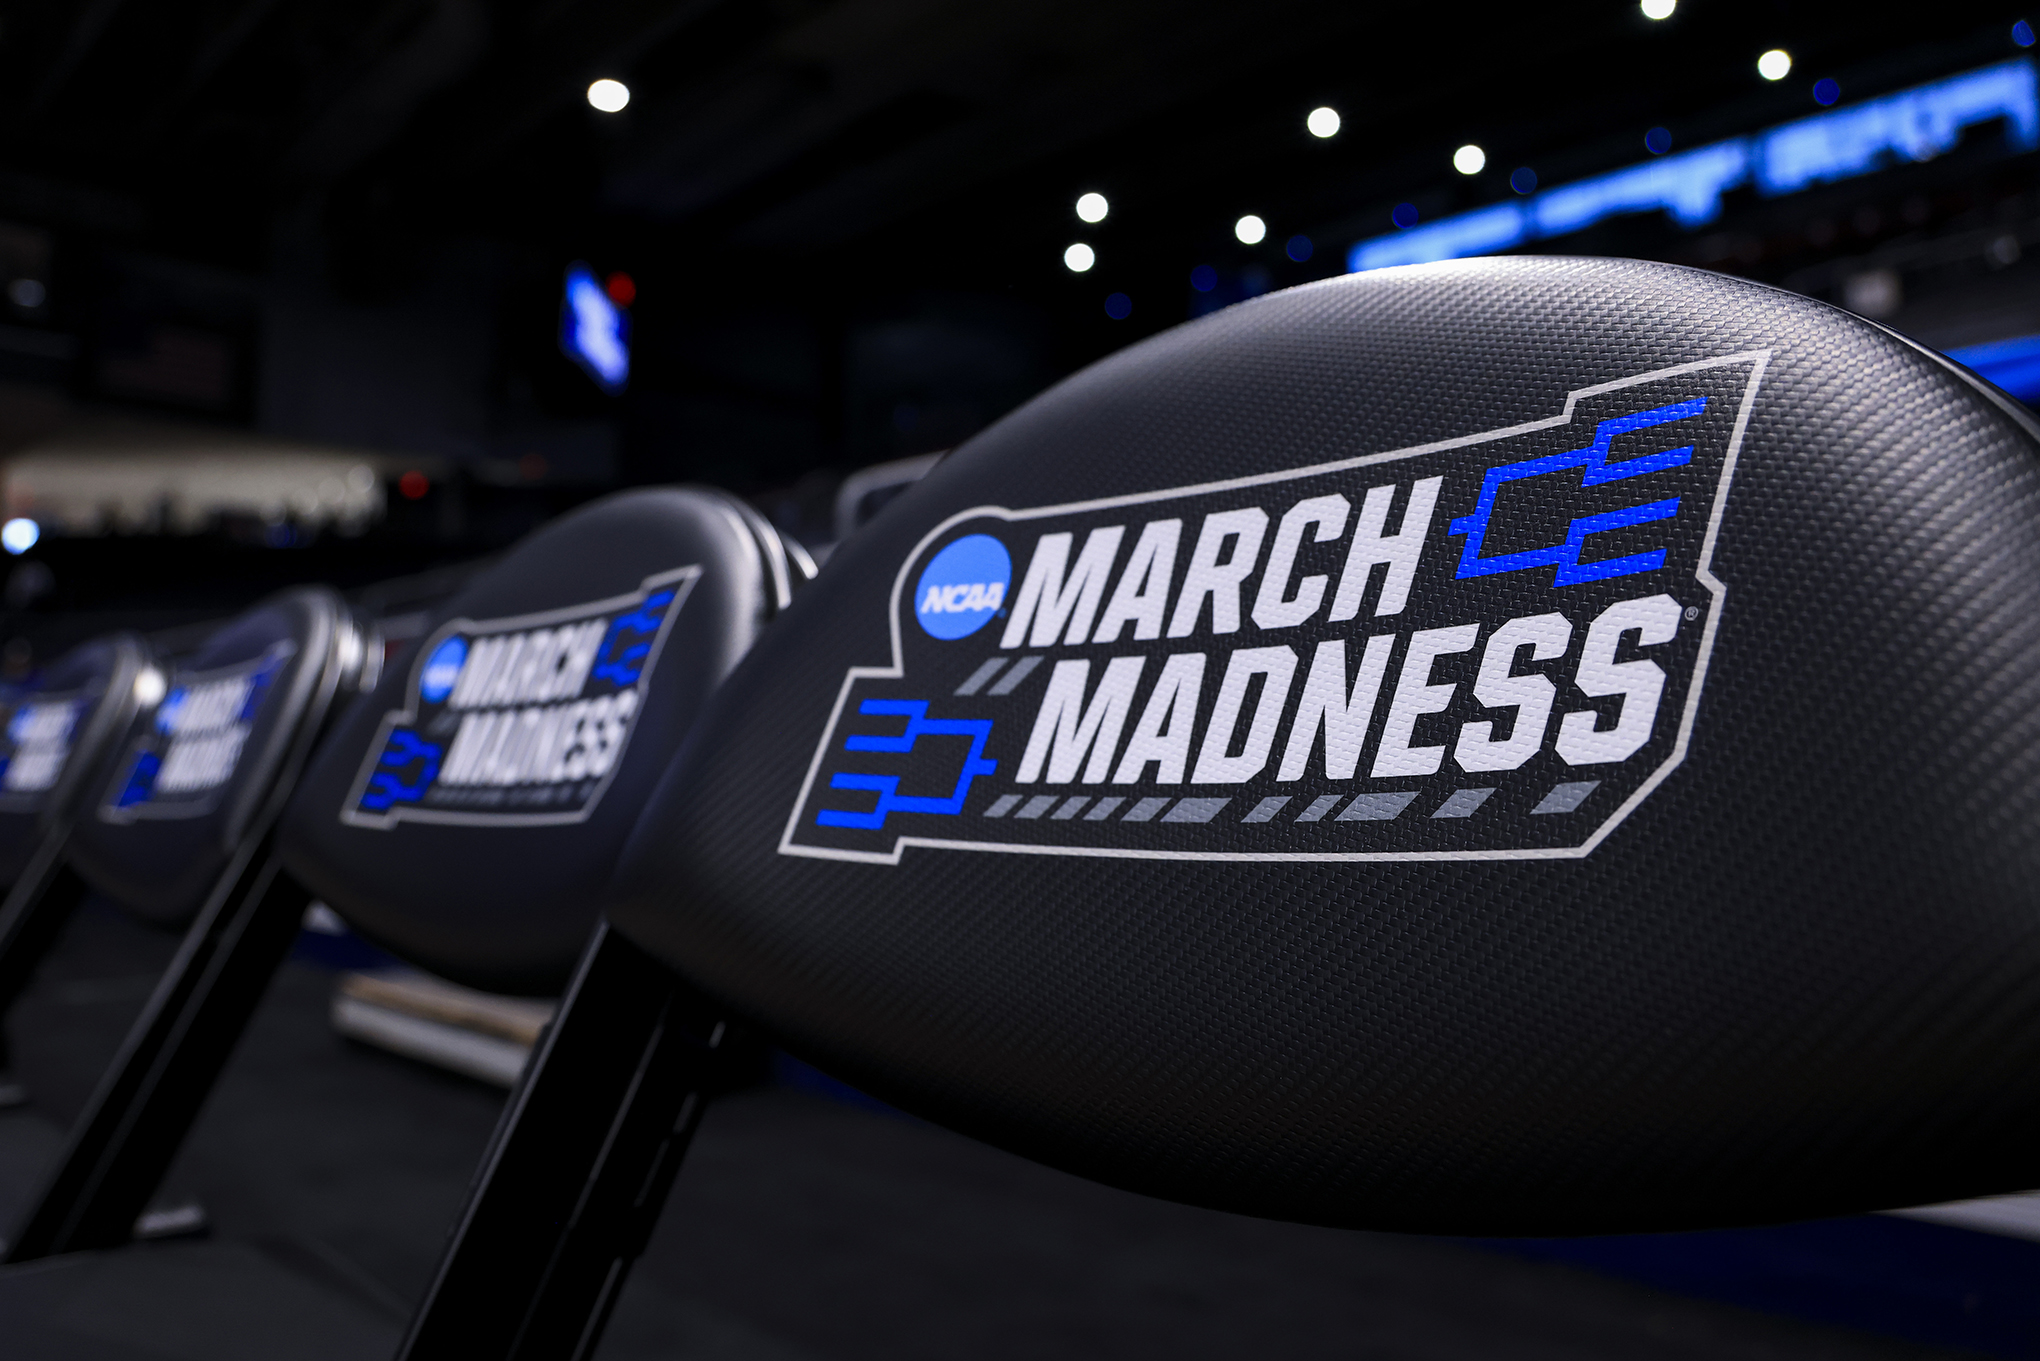 The NCAA March Madness logo is seen on a bench chairs